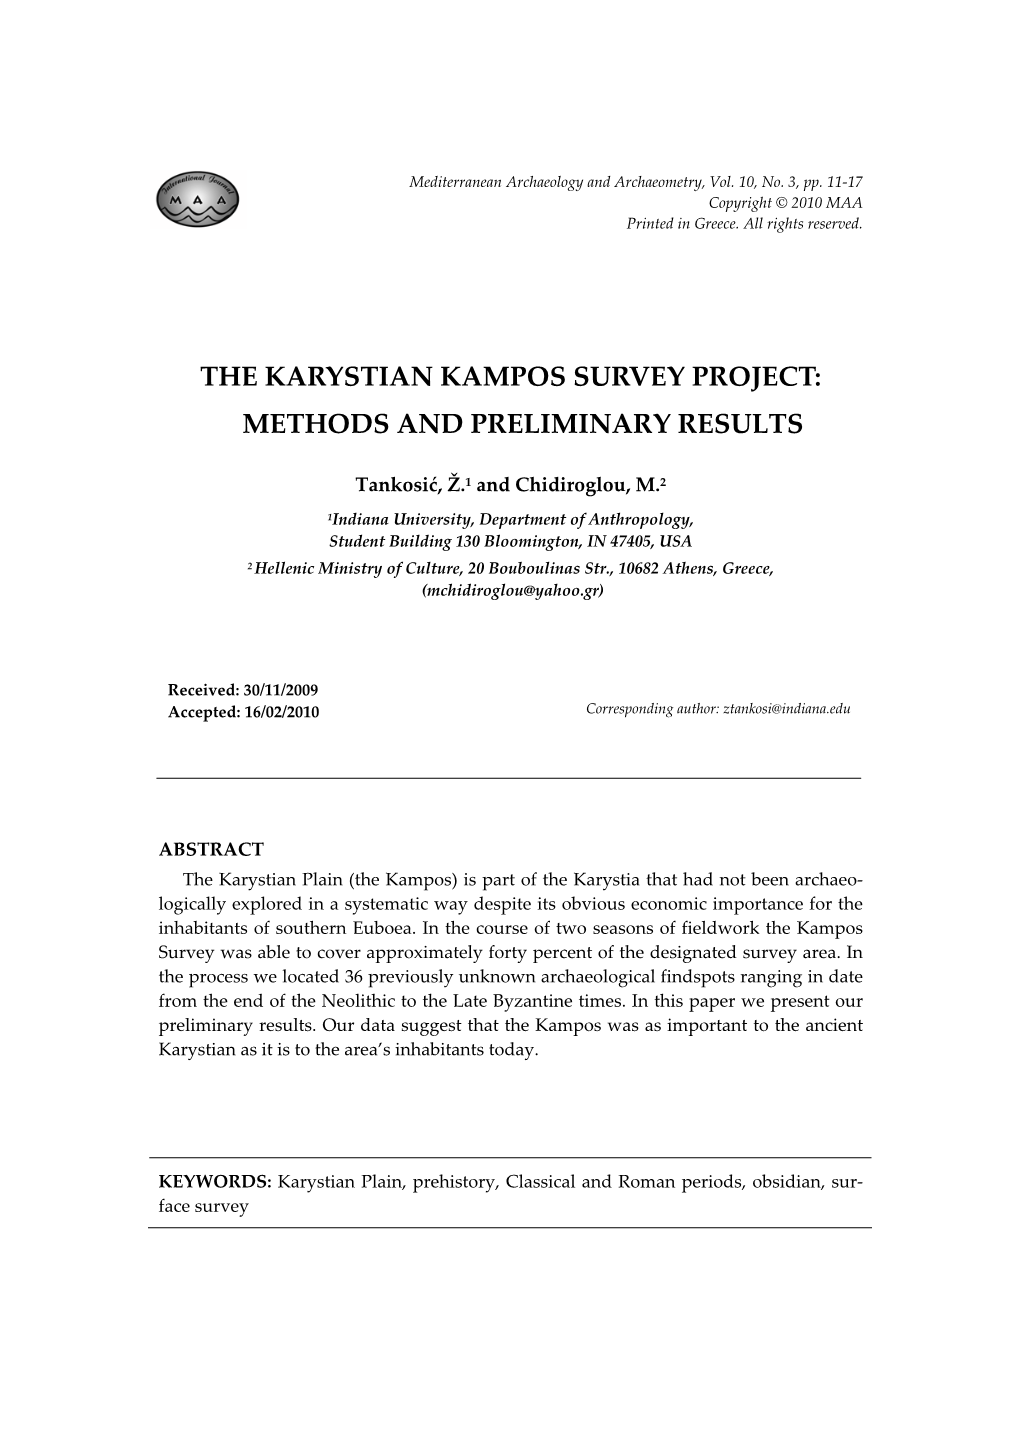 The Karystian Kampos Survey Project: Methods and Preliminary Results